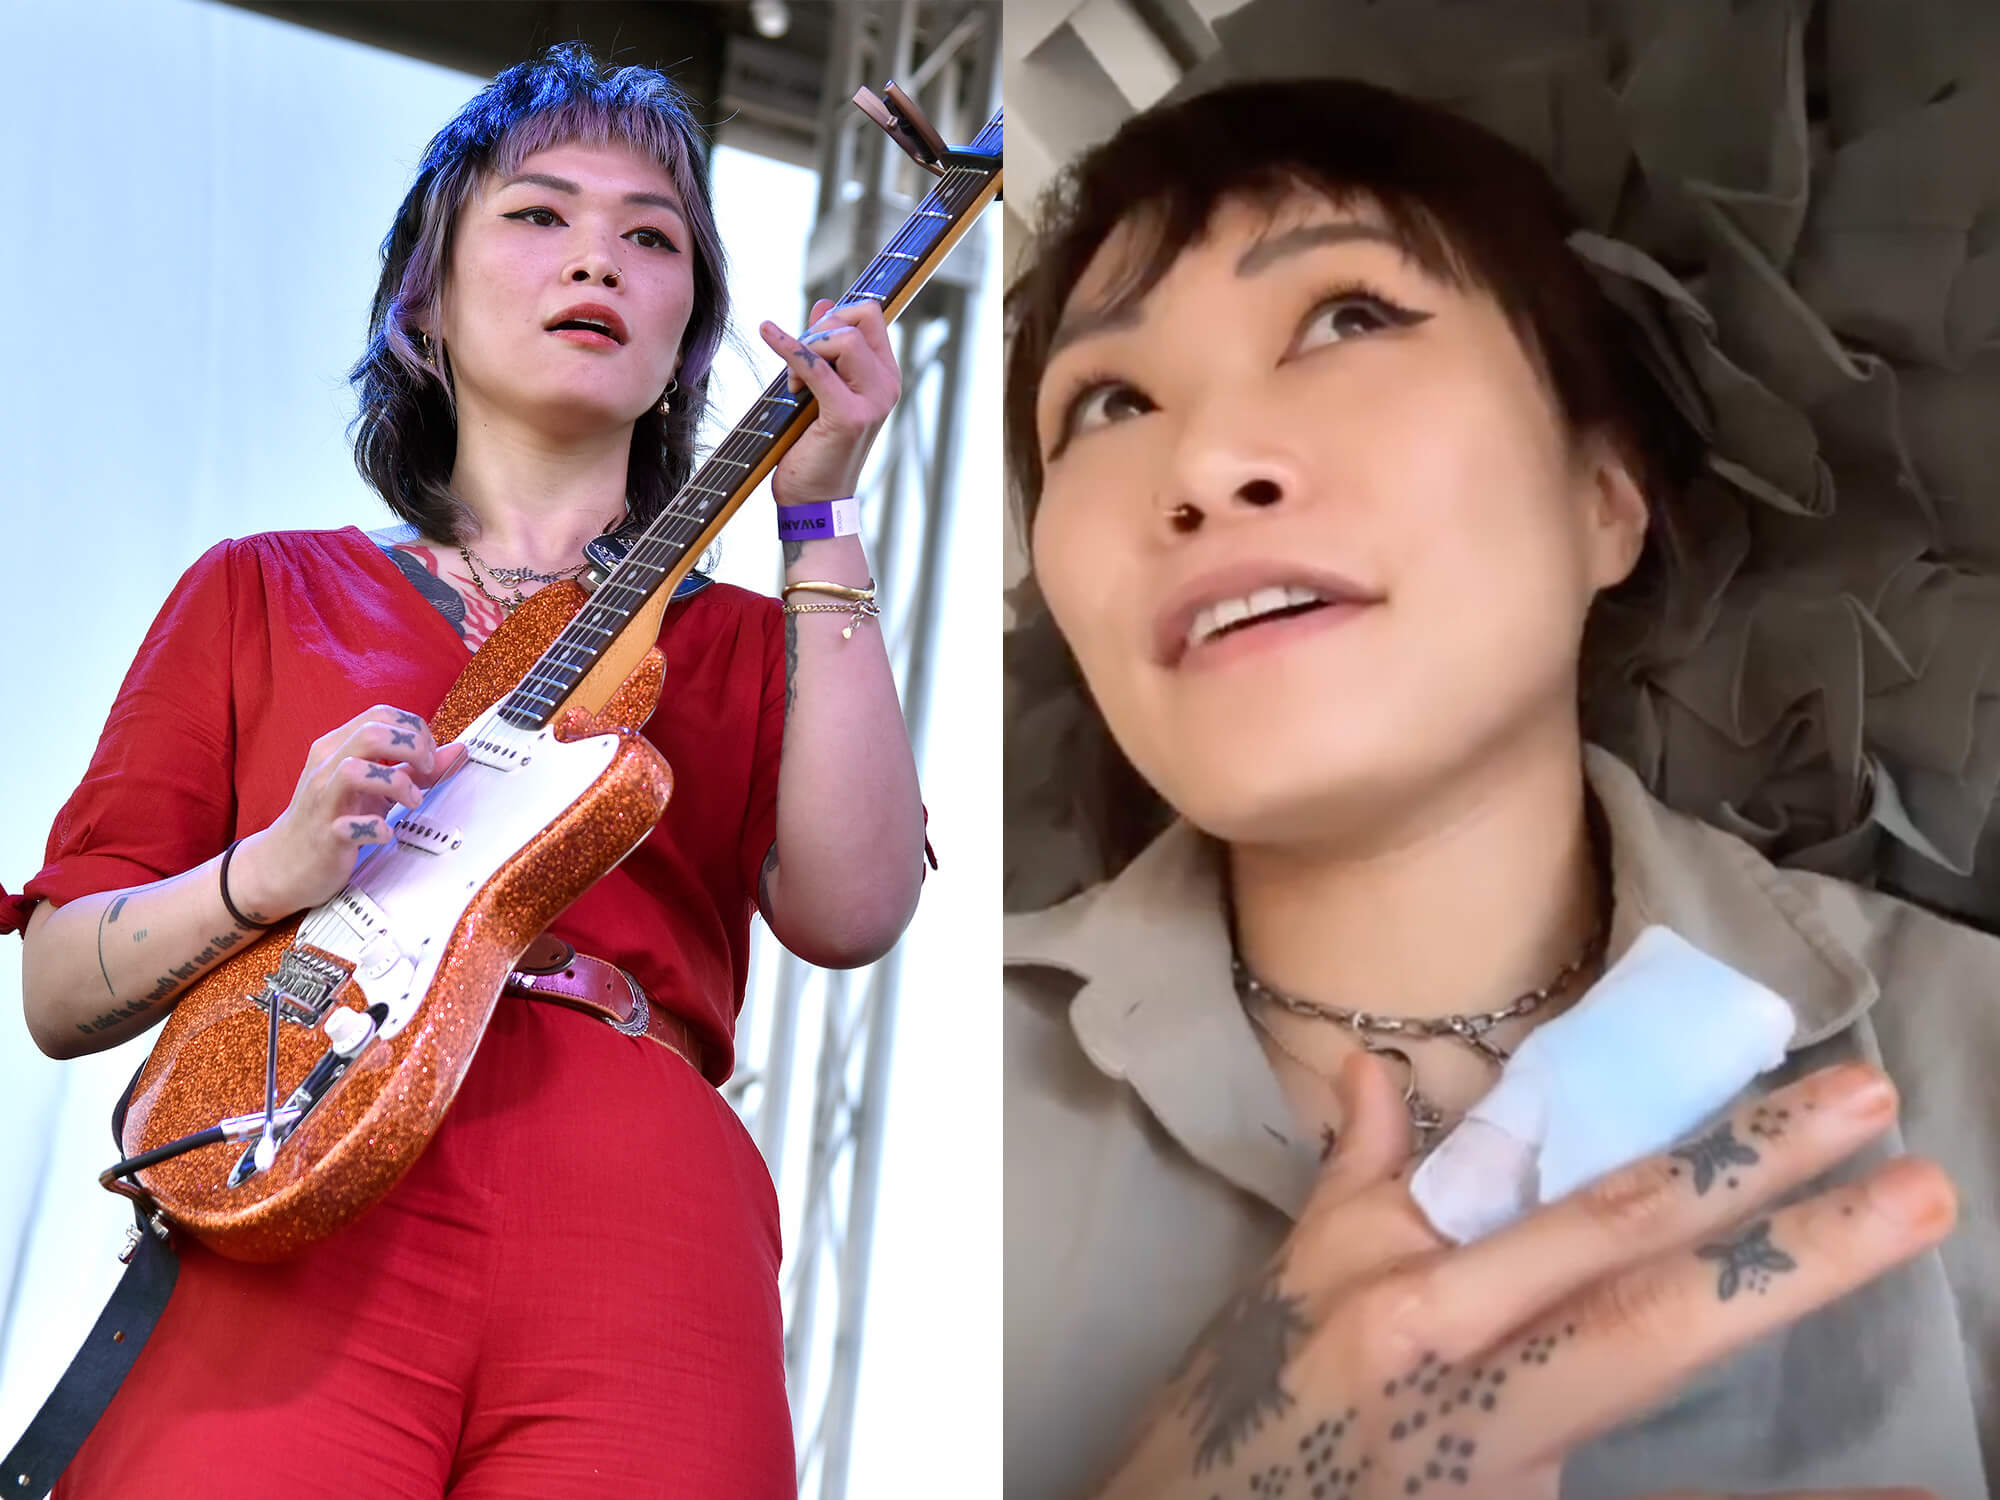 Yvette Young on stage (left) and a screen capture of her Instagram story where her bandaged finger can be seen (right)